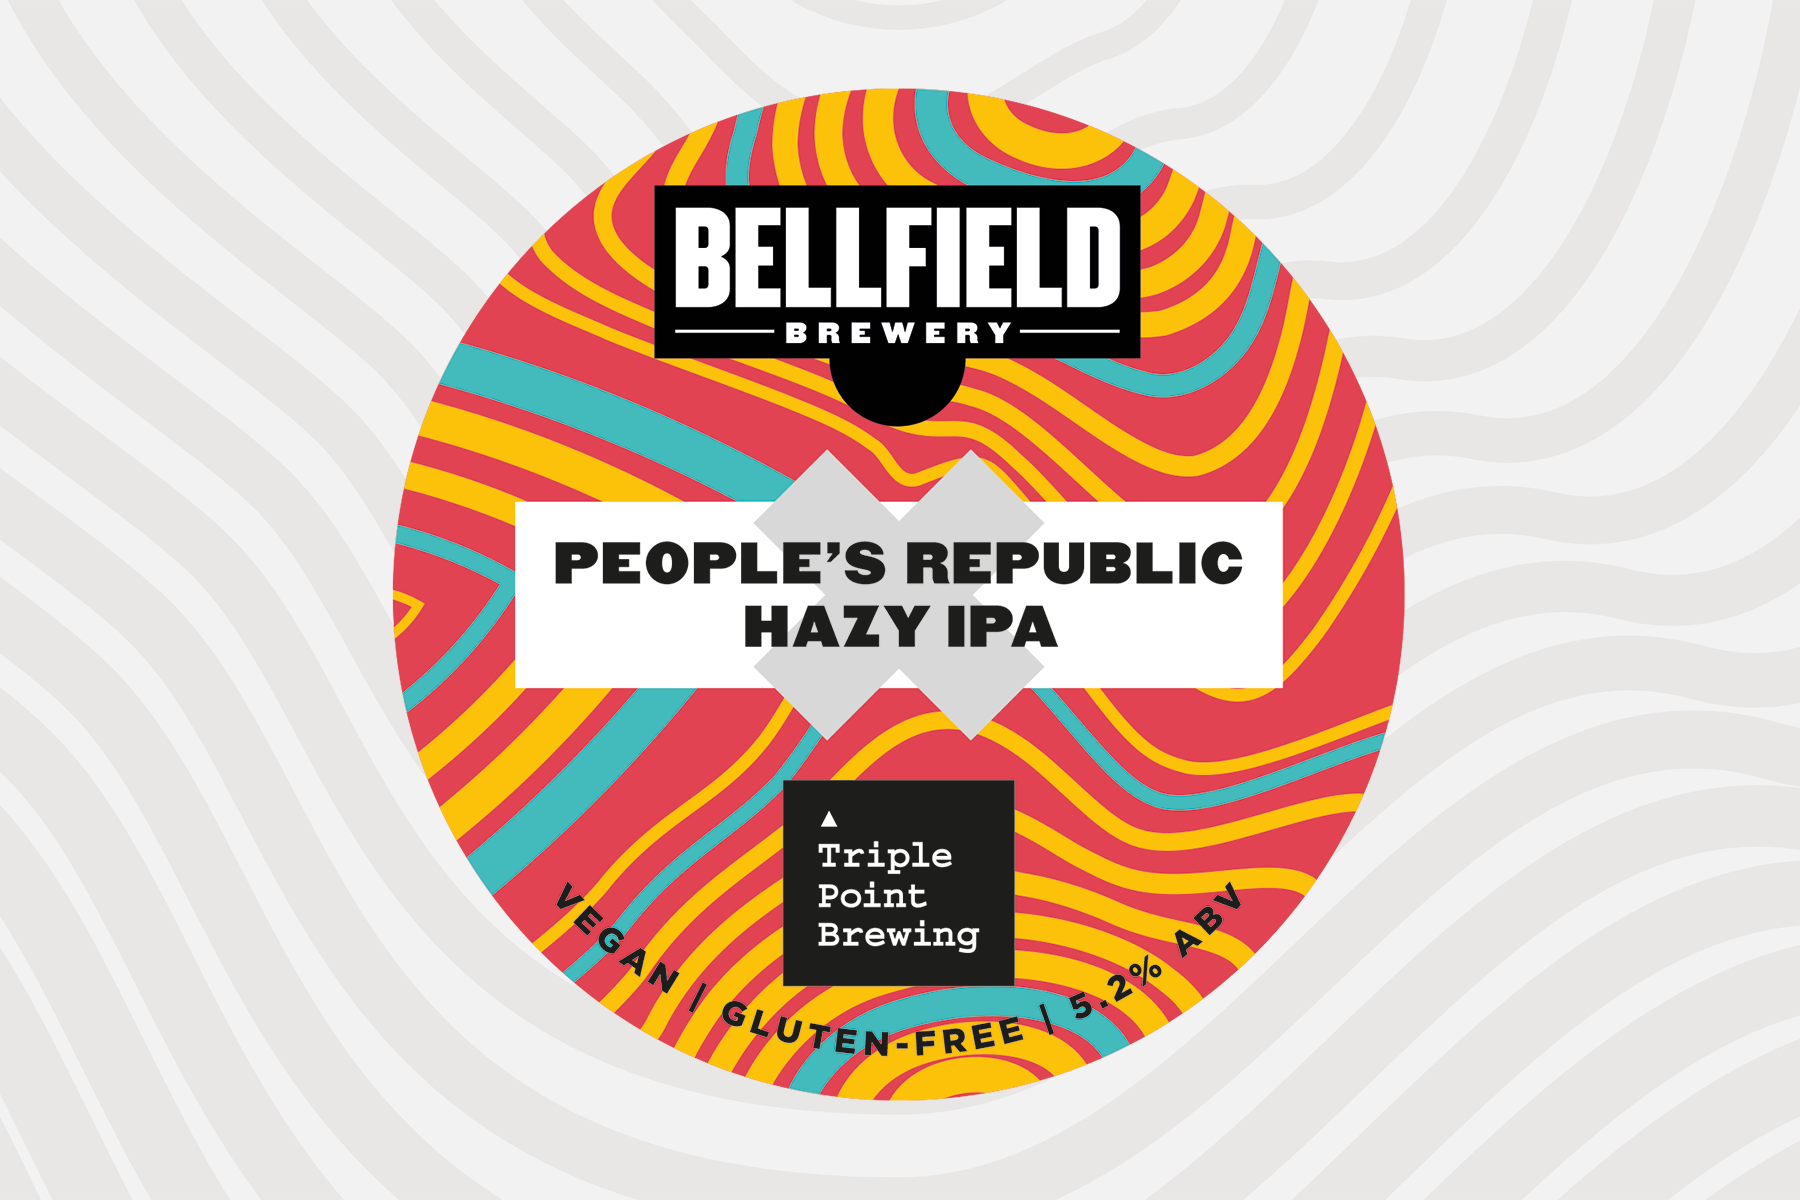 People’s Republic Hazy IPA – a Bellfield and Triple Point Brewing Collab